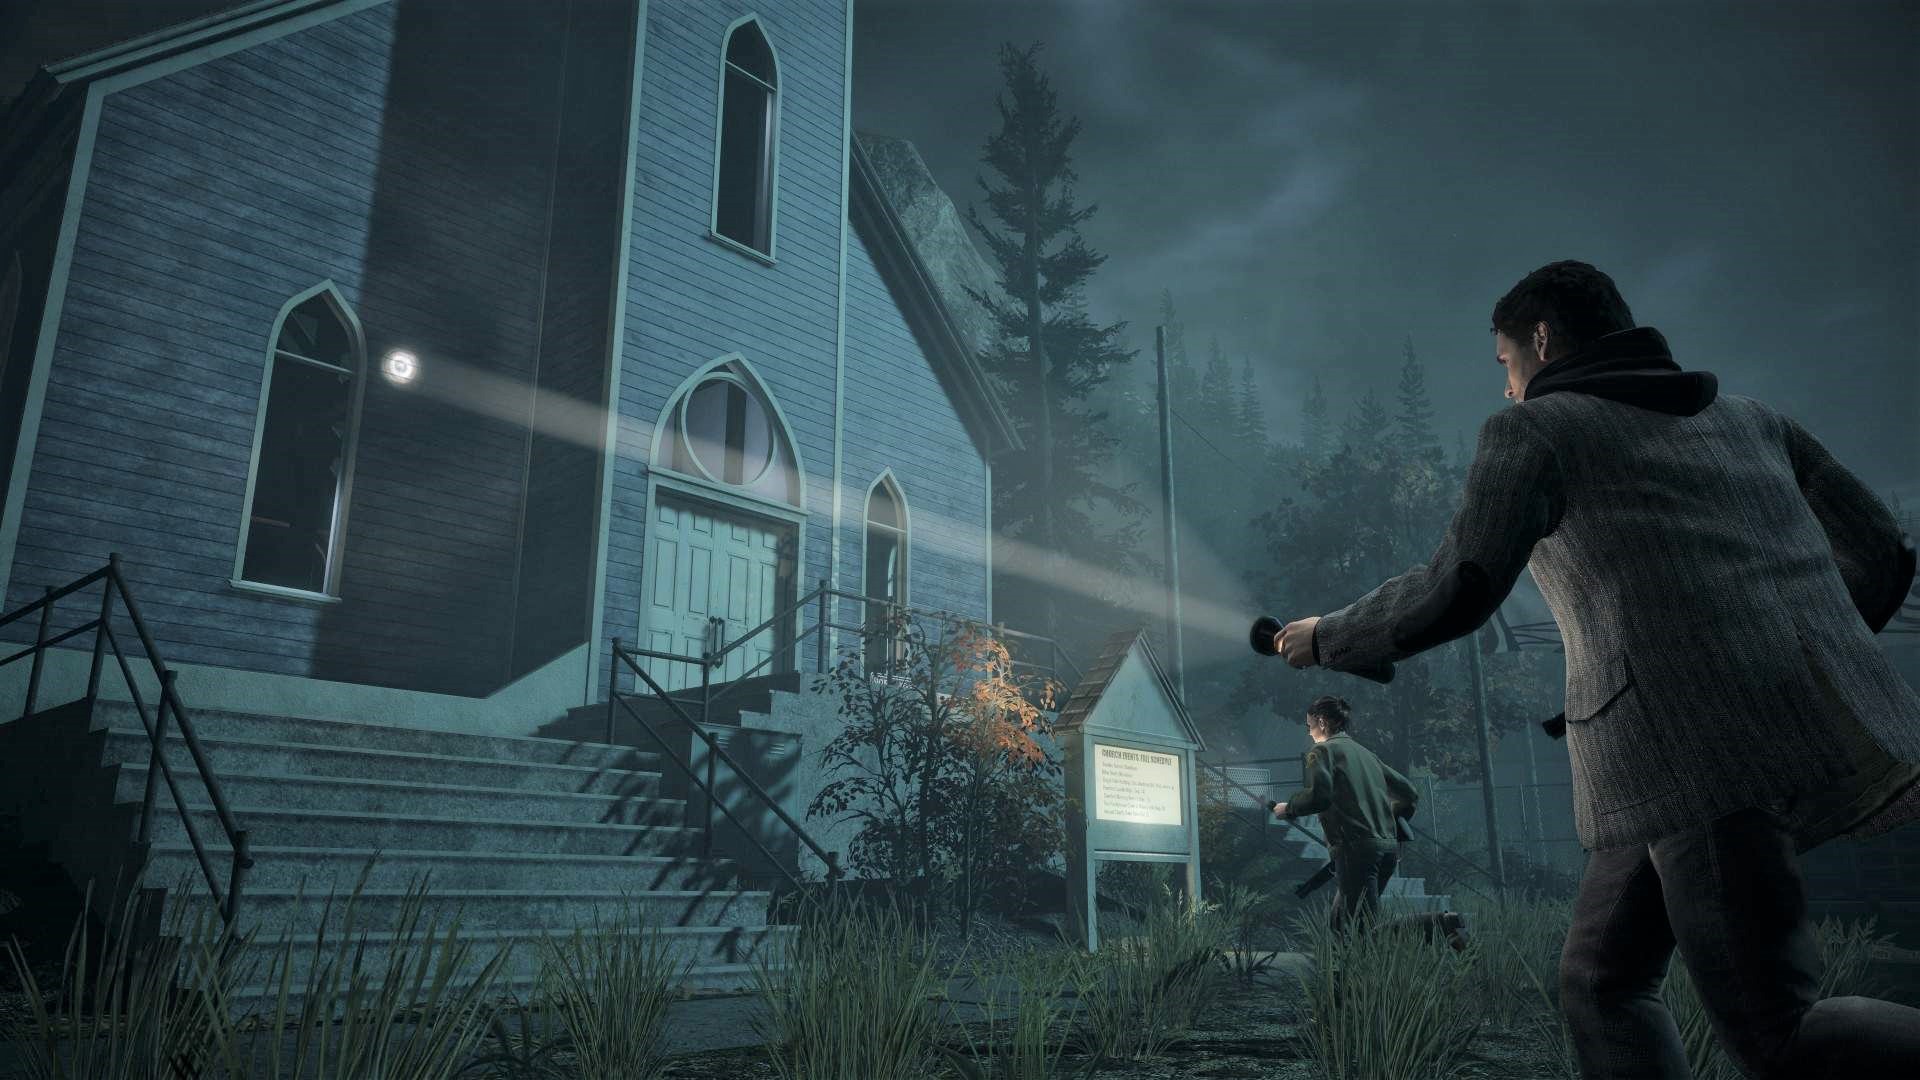 Alan Wake 2: PC System Requirements 